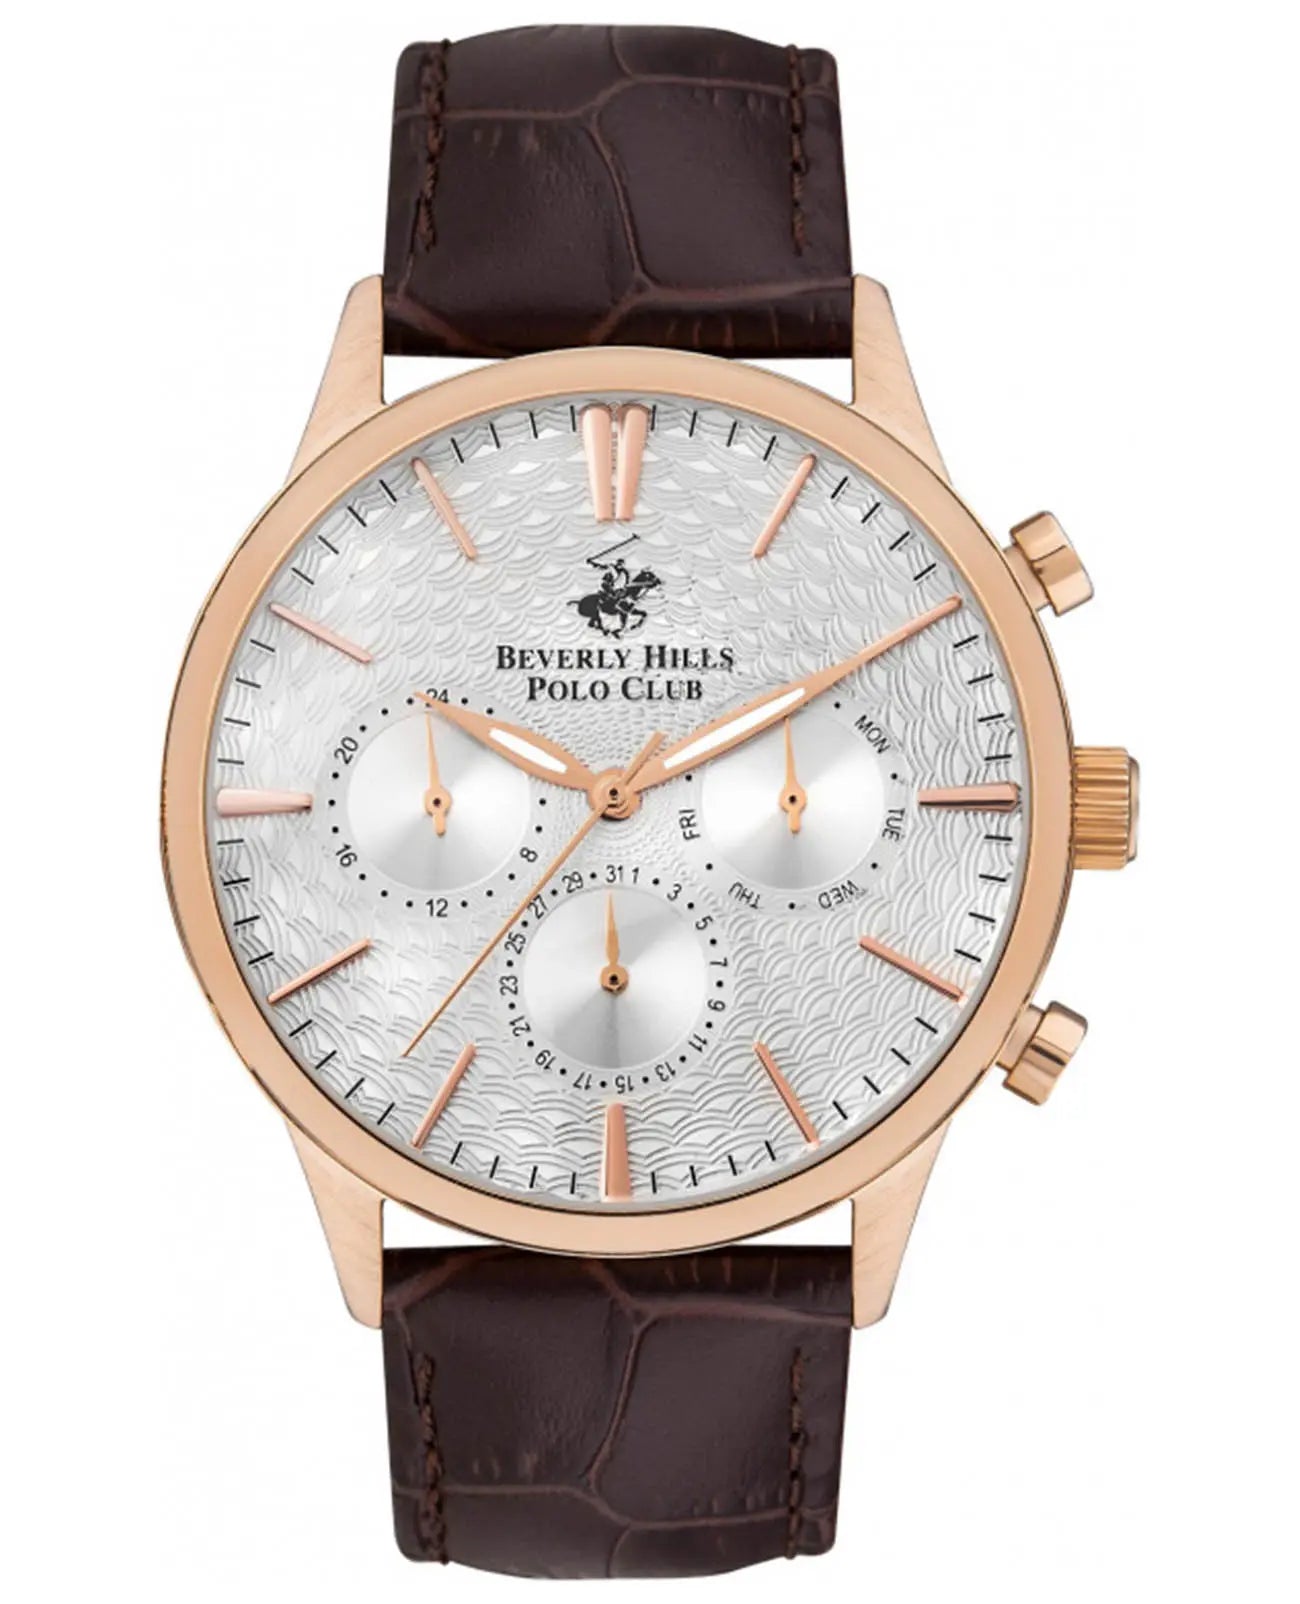 Beverly Hills Polo Club for Men's Watch | Watches & Accessories | Halabh.com